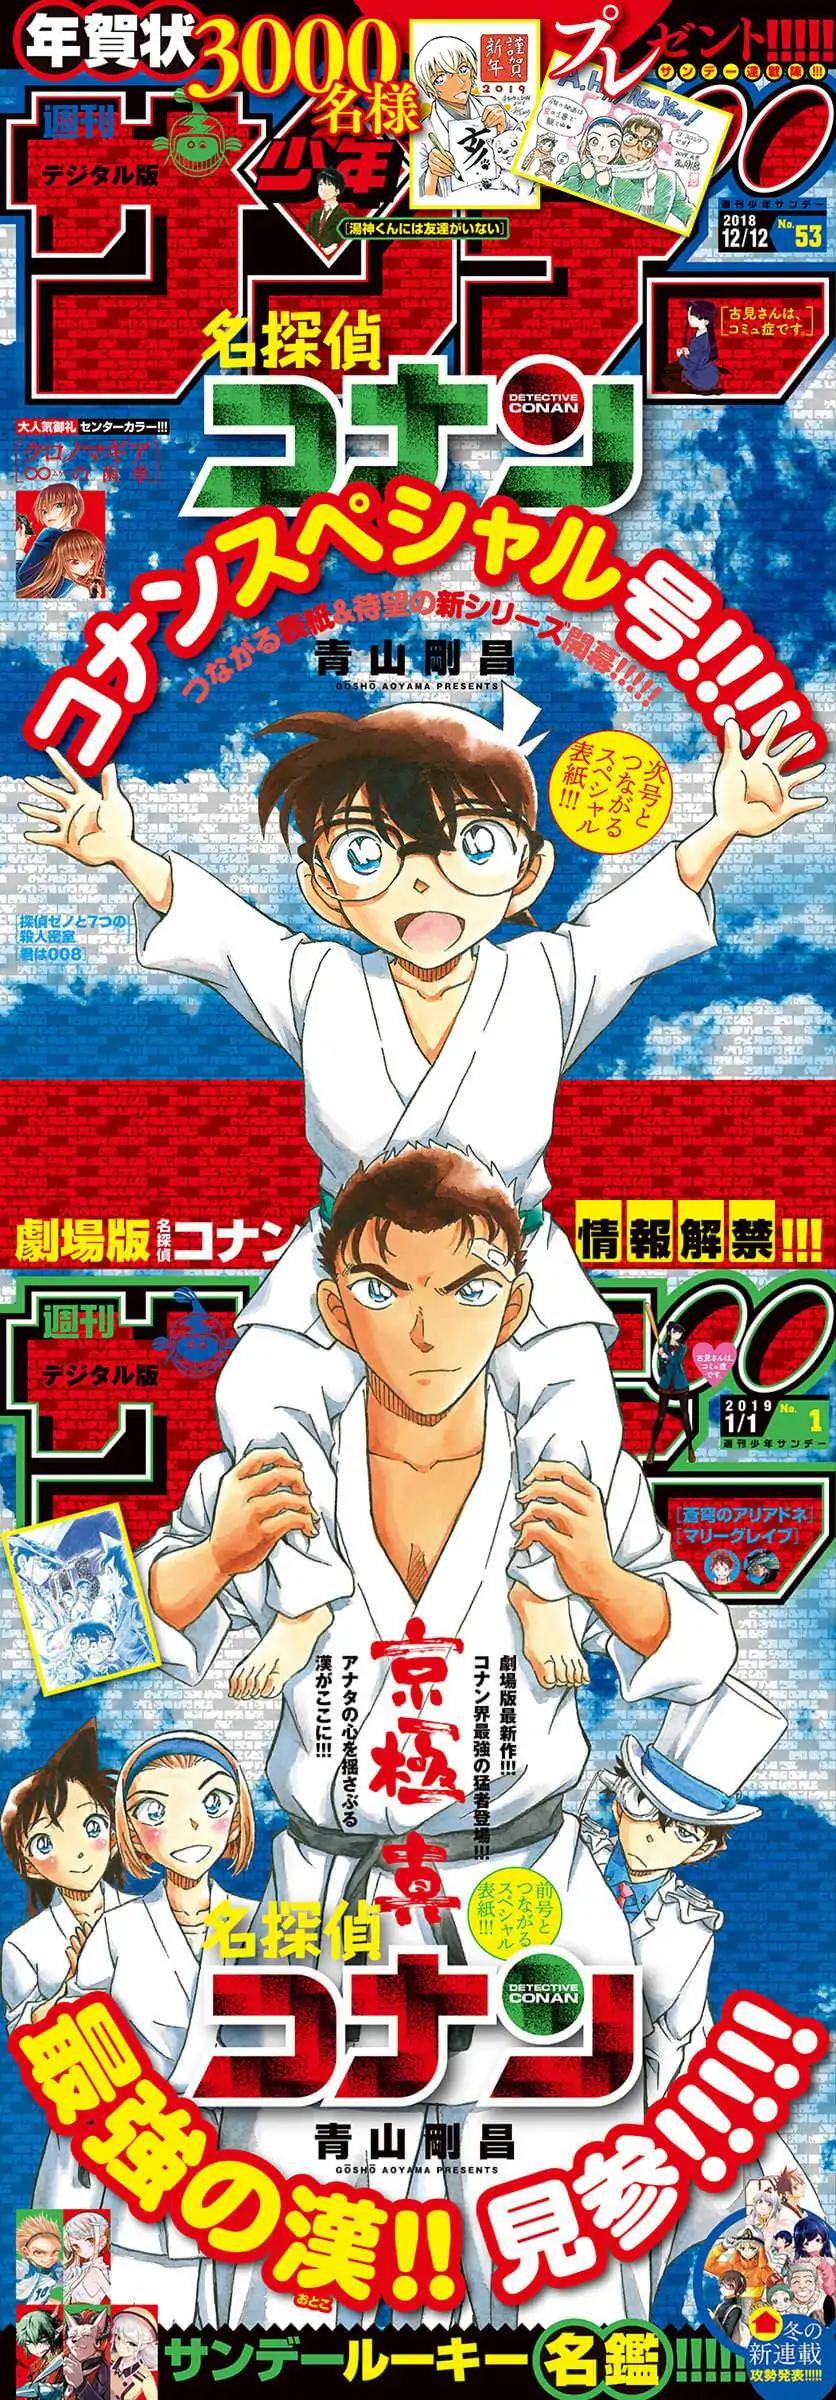 Read Detective Conan Chapter 1023 Weird Meds - Page 1 For Free In The Highest Quality